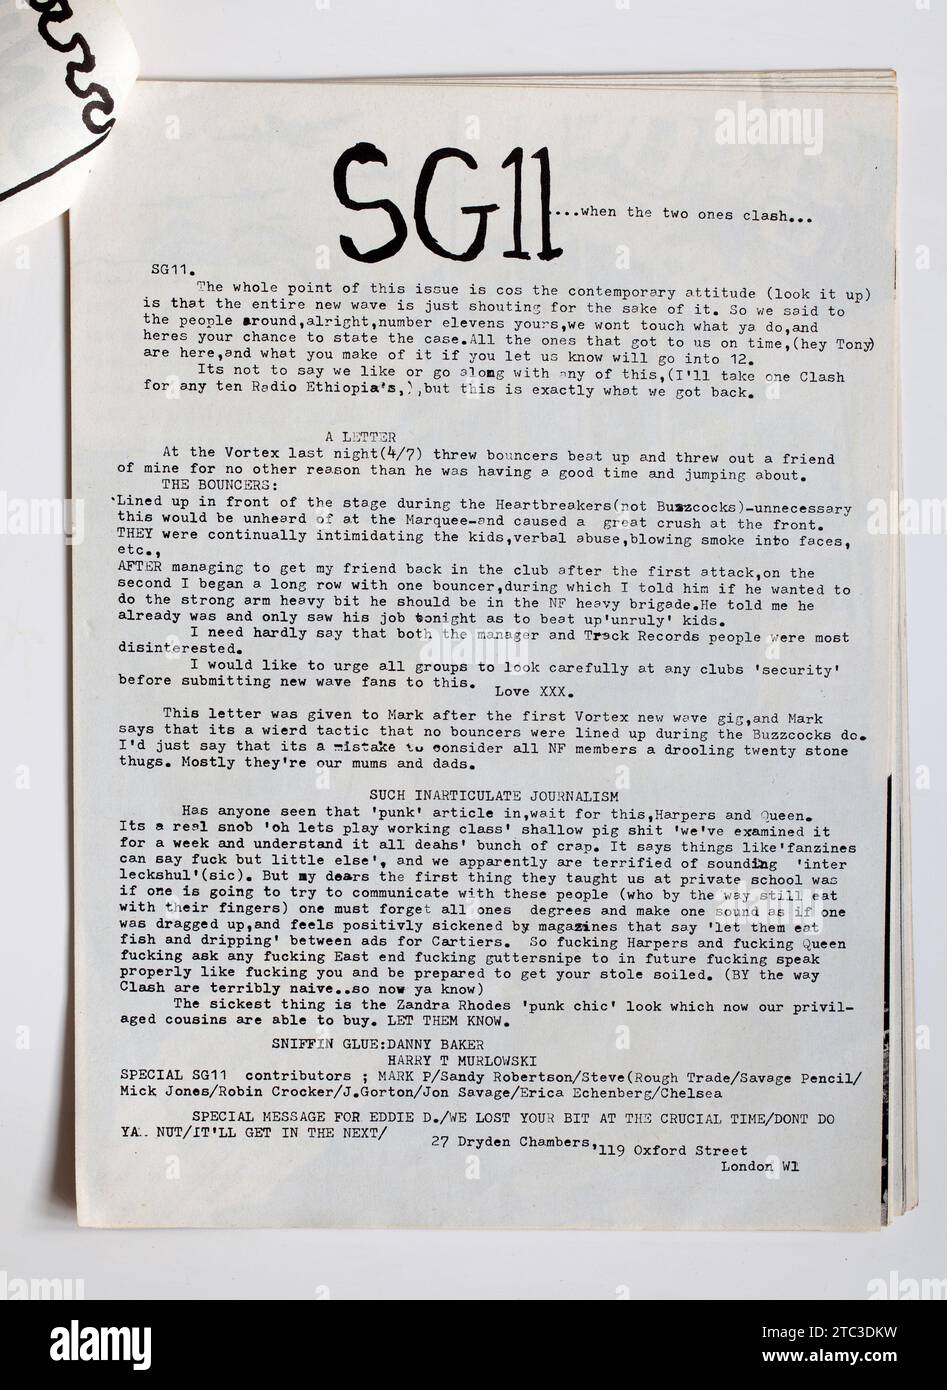 Editorial Comment by Danny Baker and Henry Murlowski in 1970s SNIFFIN GLUE Punk Rock Fanzine Magazine Stock Photo